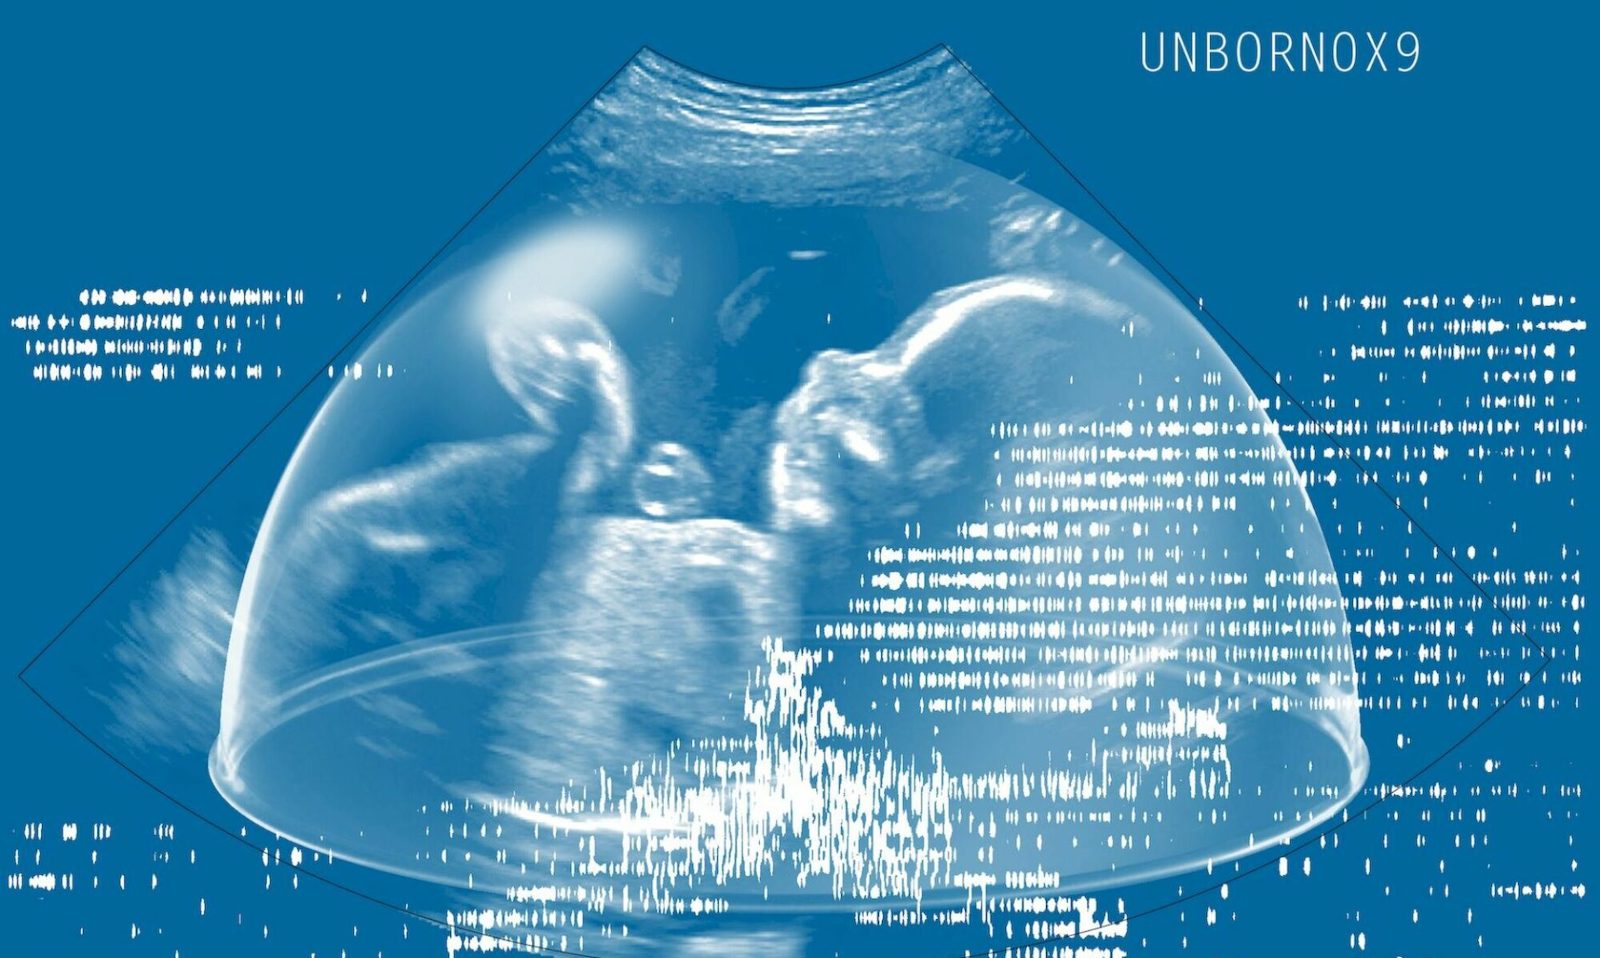 UNBORN0X9, a project by Future Baby Production collective Art4Med